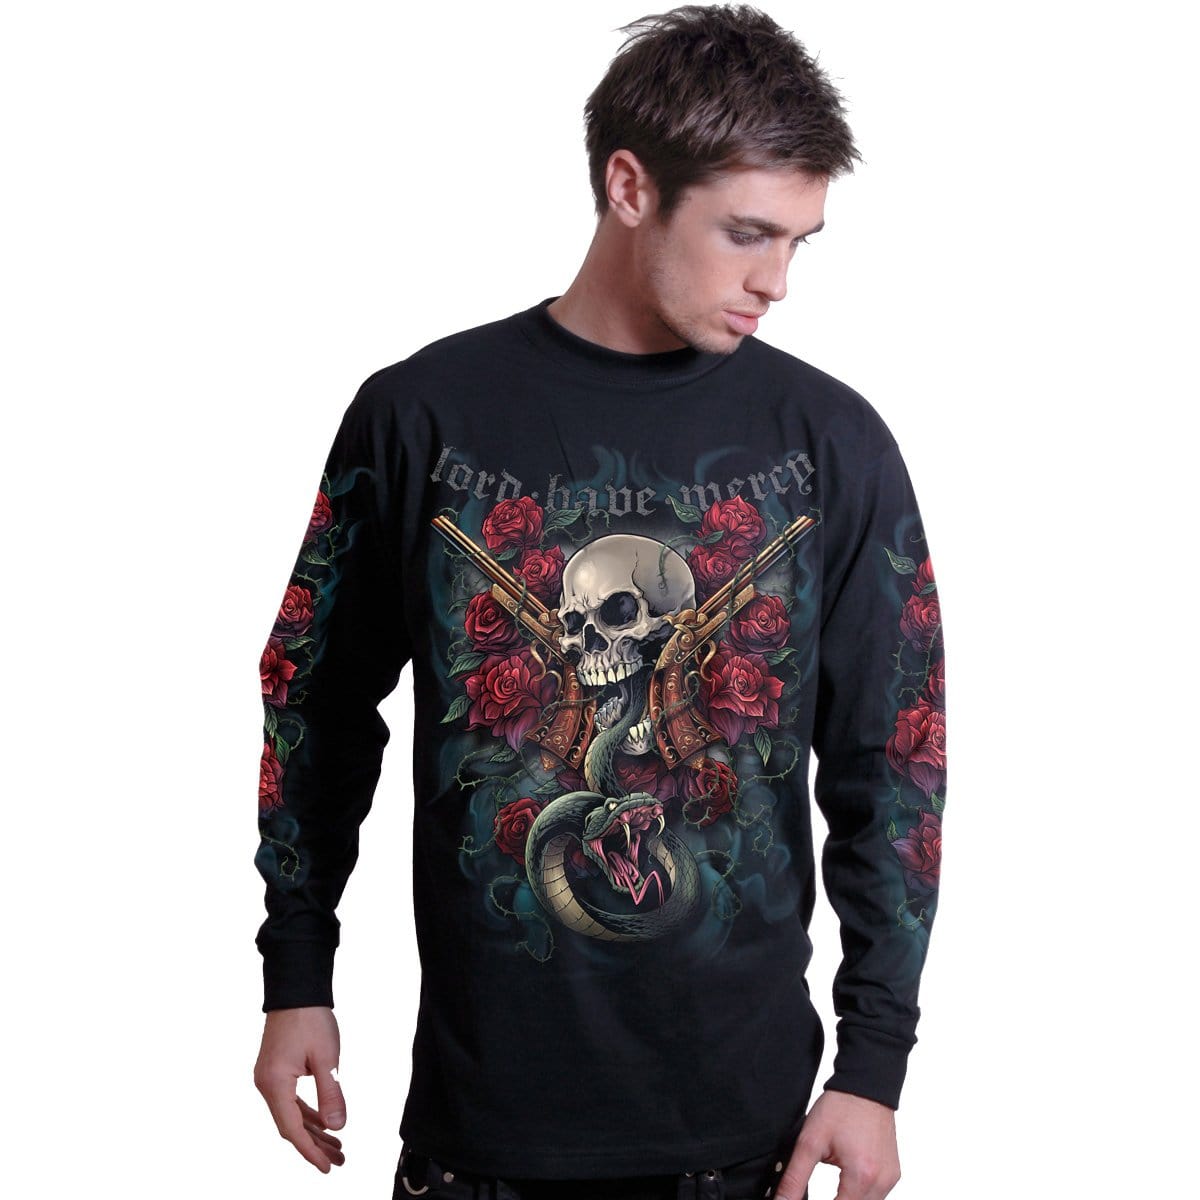 LORD HAVE MERCY - Longsleeve T-Shirt Black - Spiral USA